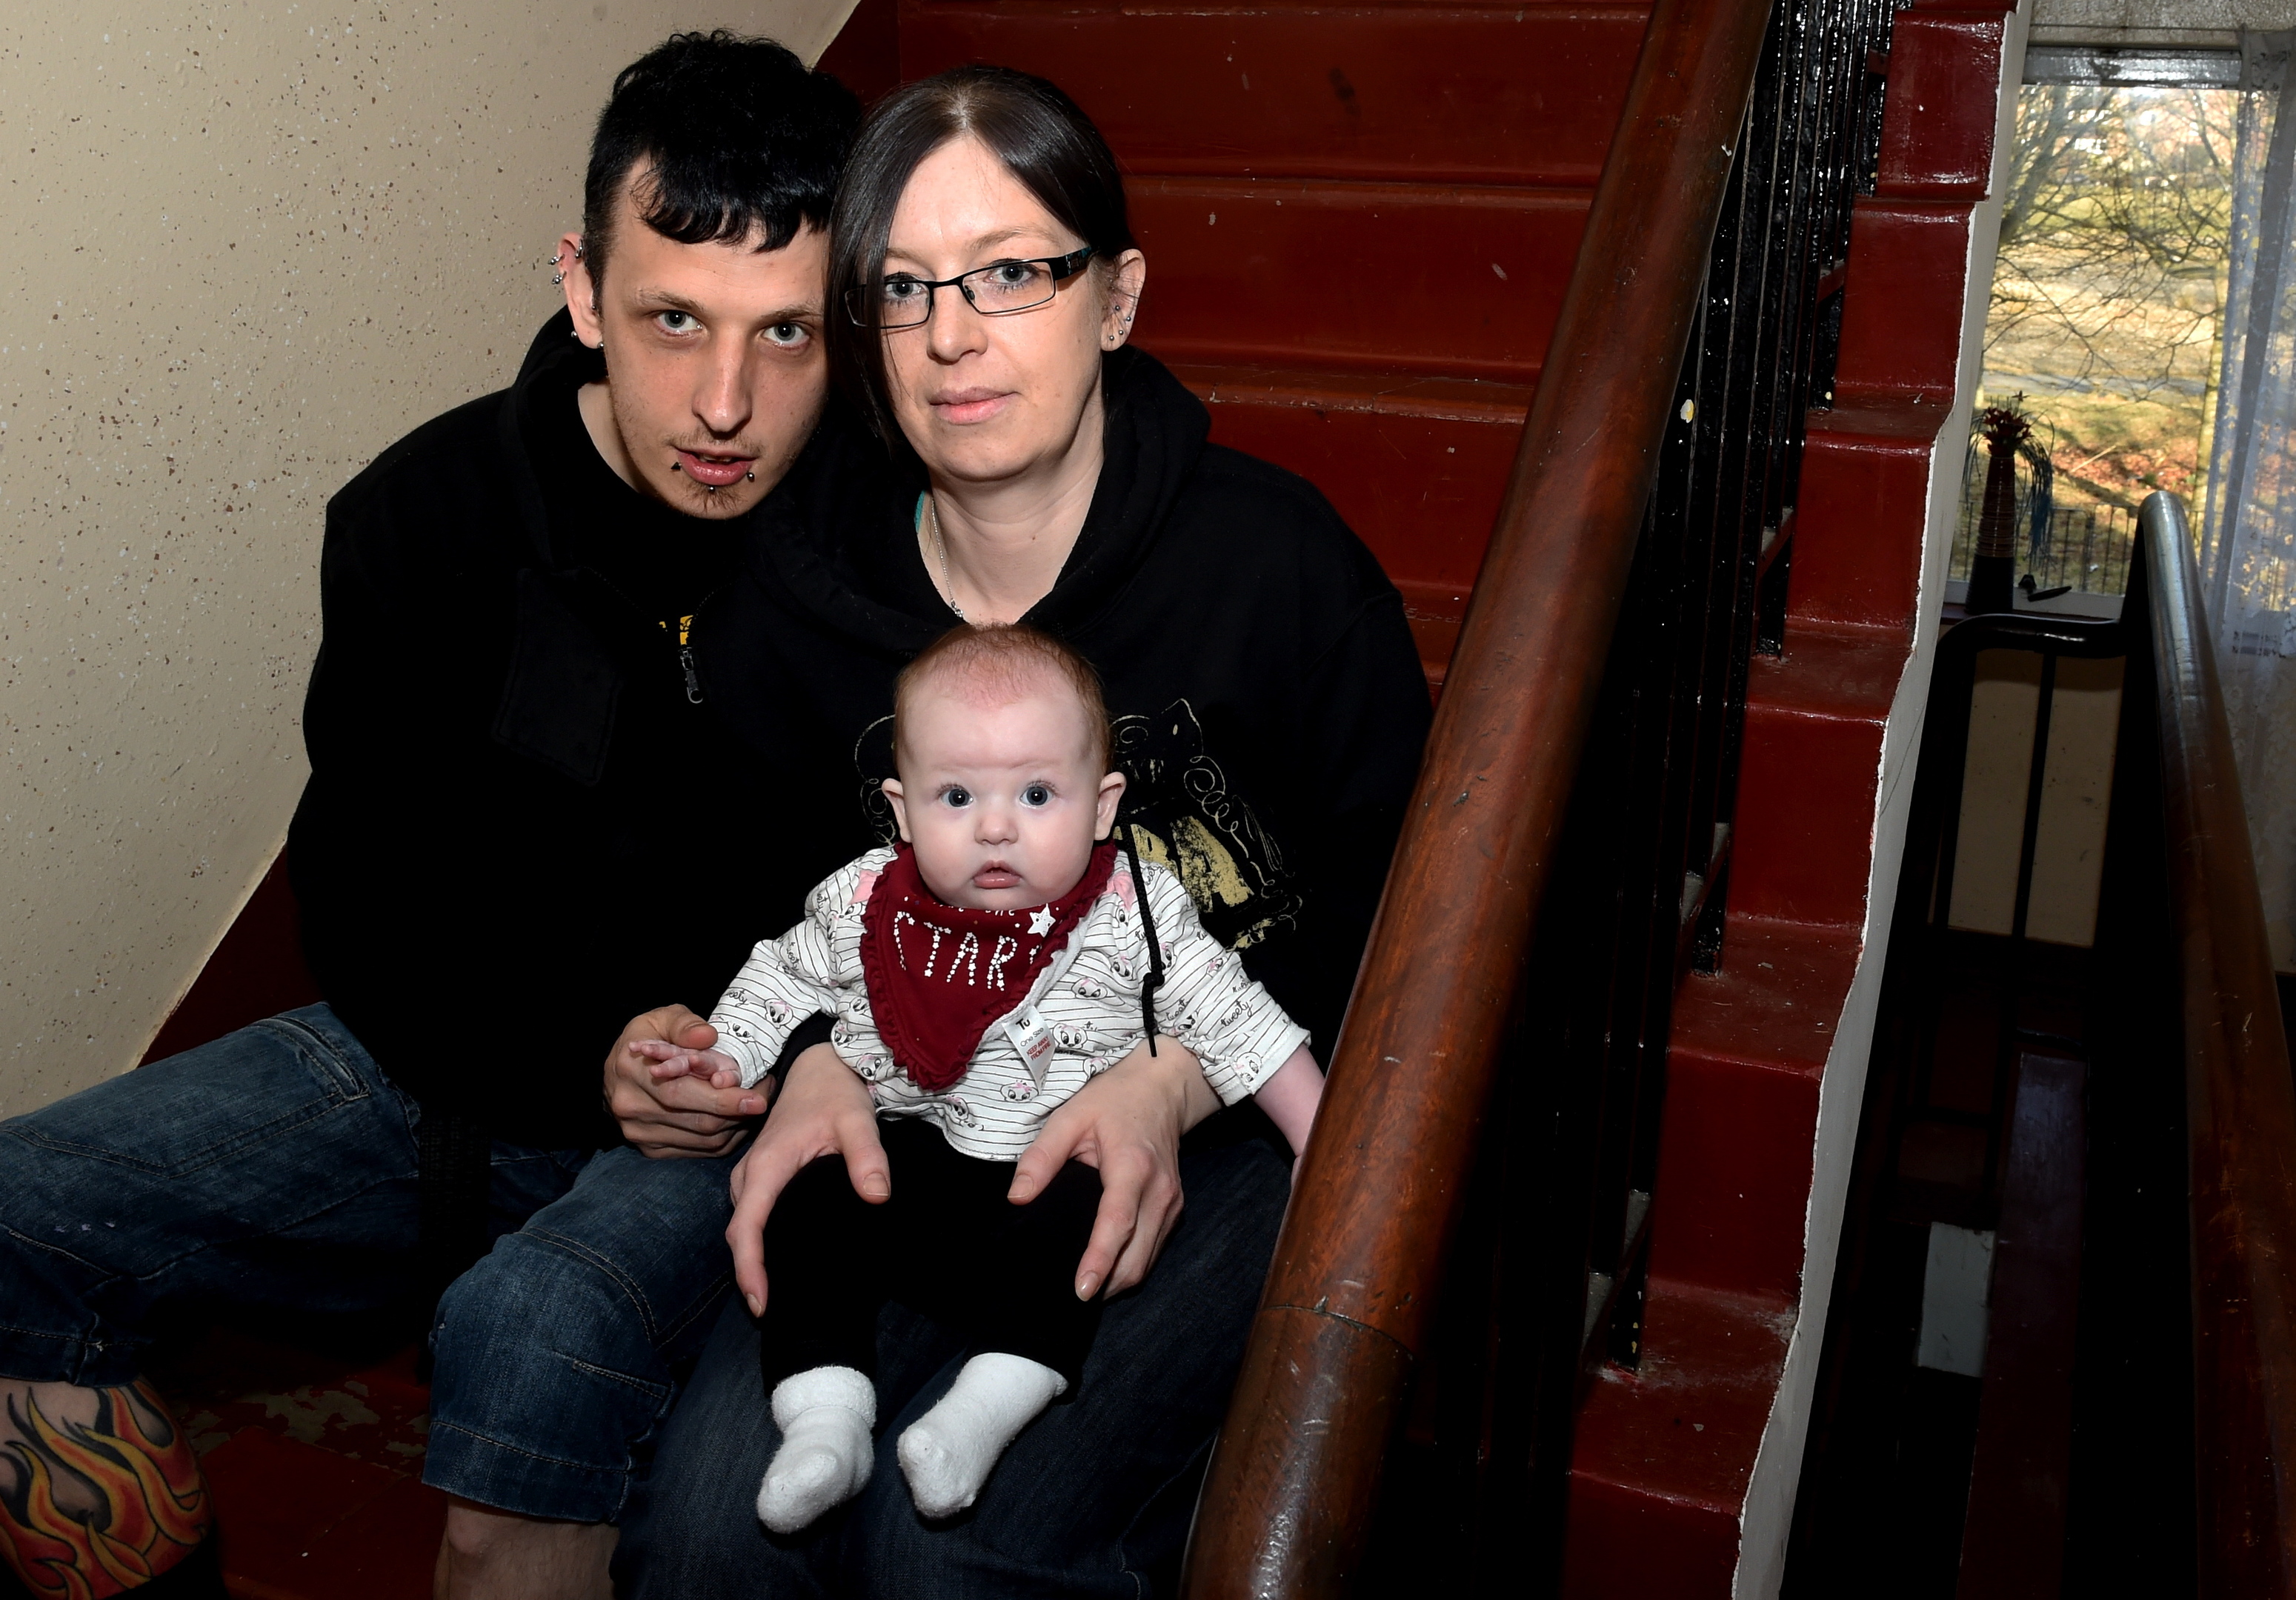 Katie Collie and Phil Maher with Megan, 17 week old baby at Kincorth, Aberdeen.